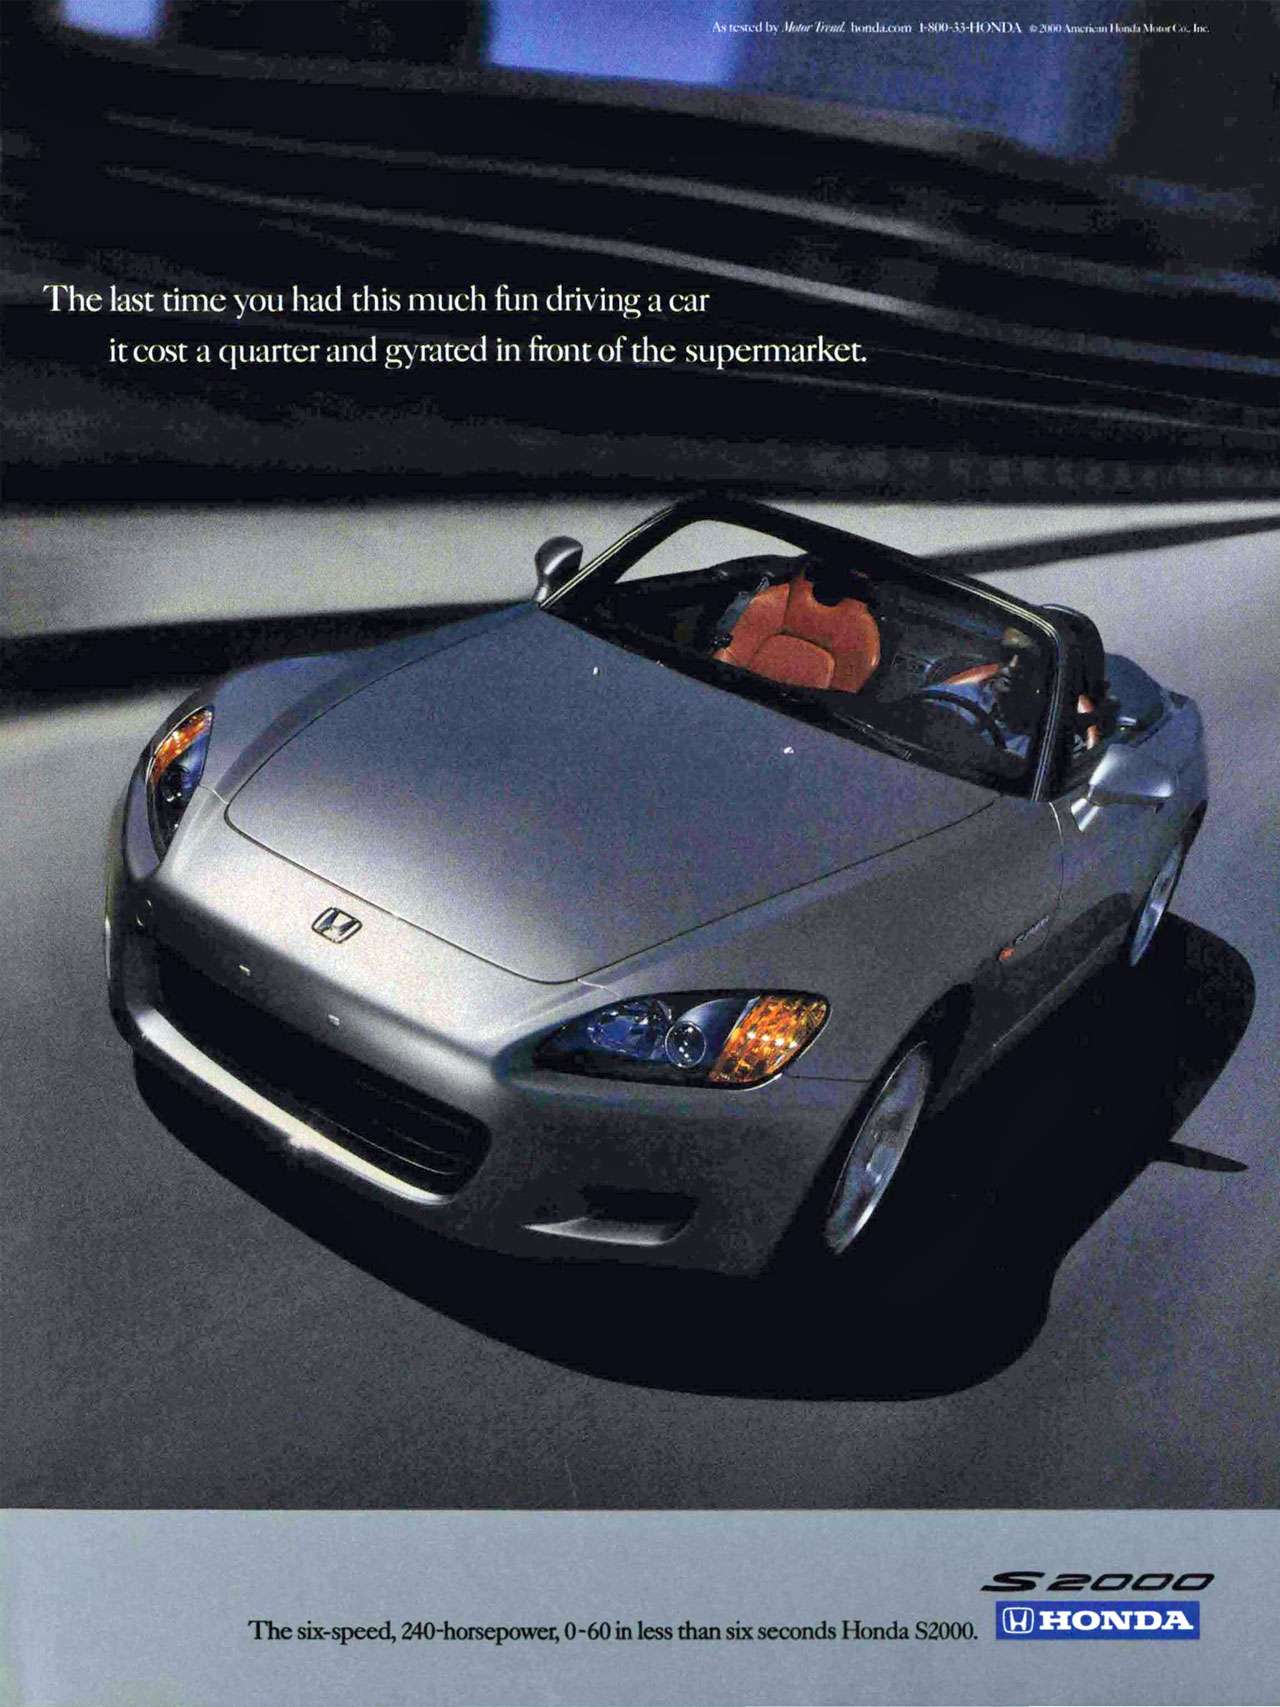 The last time you had this much fun driving a car it cost a quarter and gyrated in front of the supermarket. The six-speed, 240-horsepower, 0-60 in less than six seconds Honda S2000.